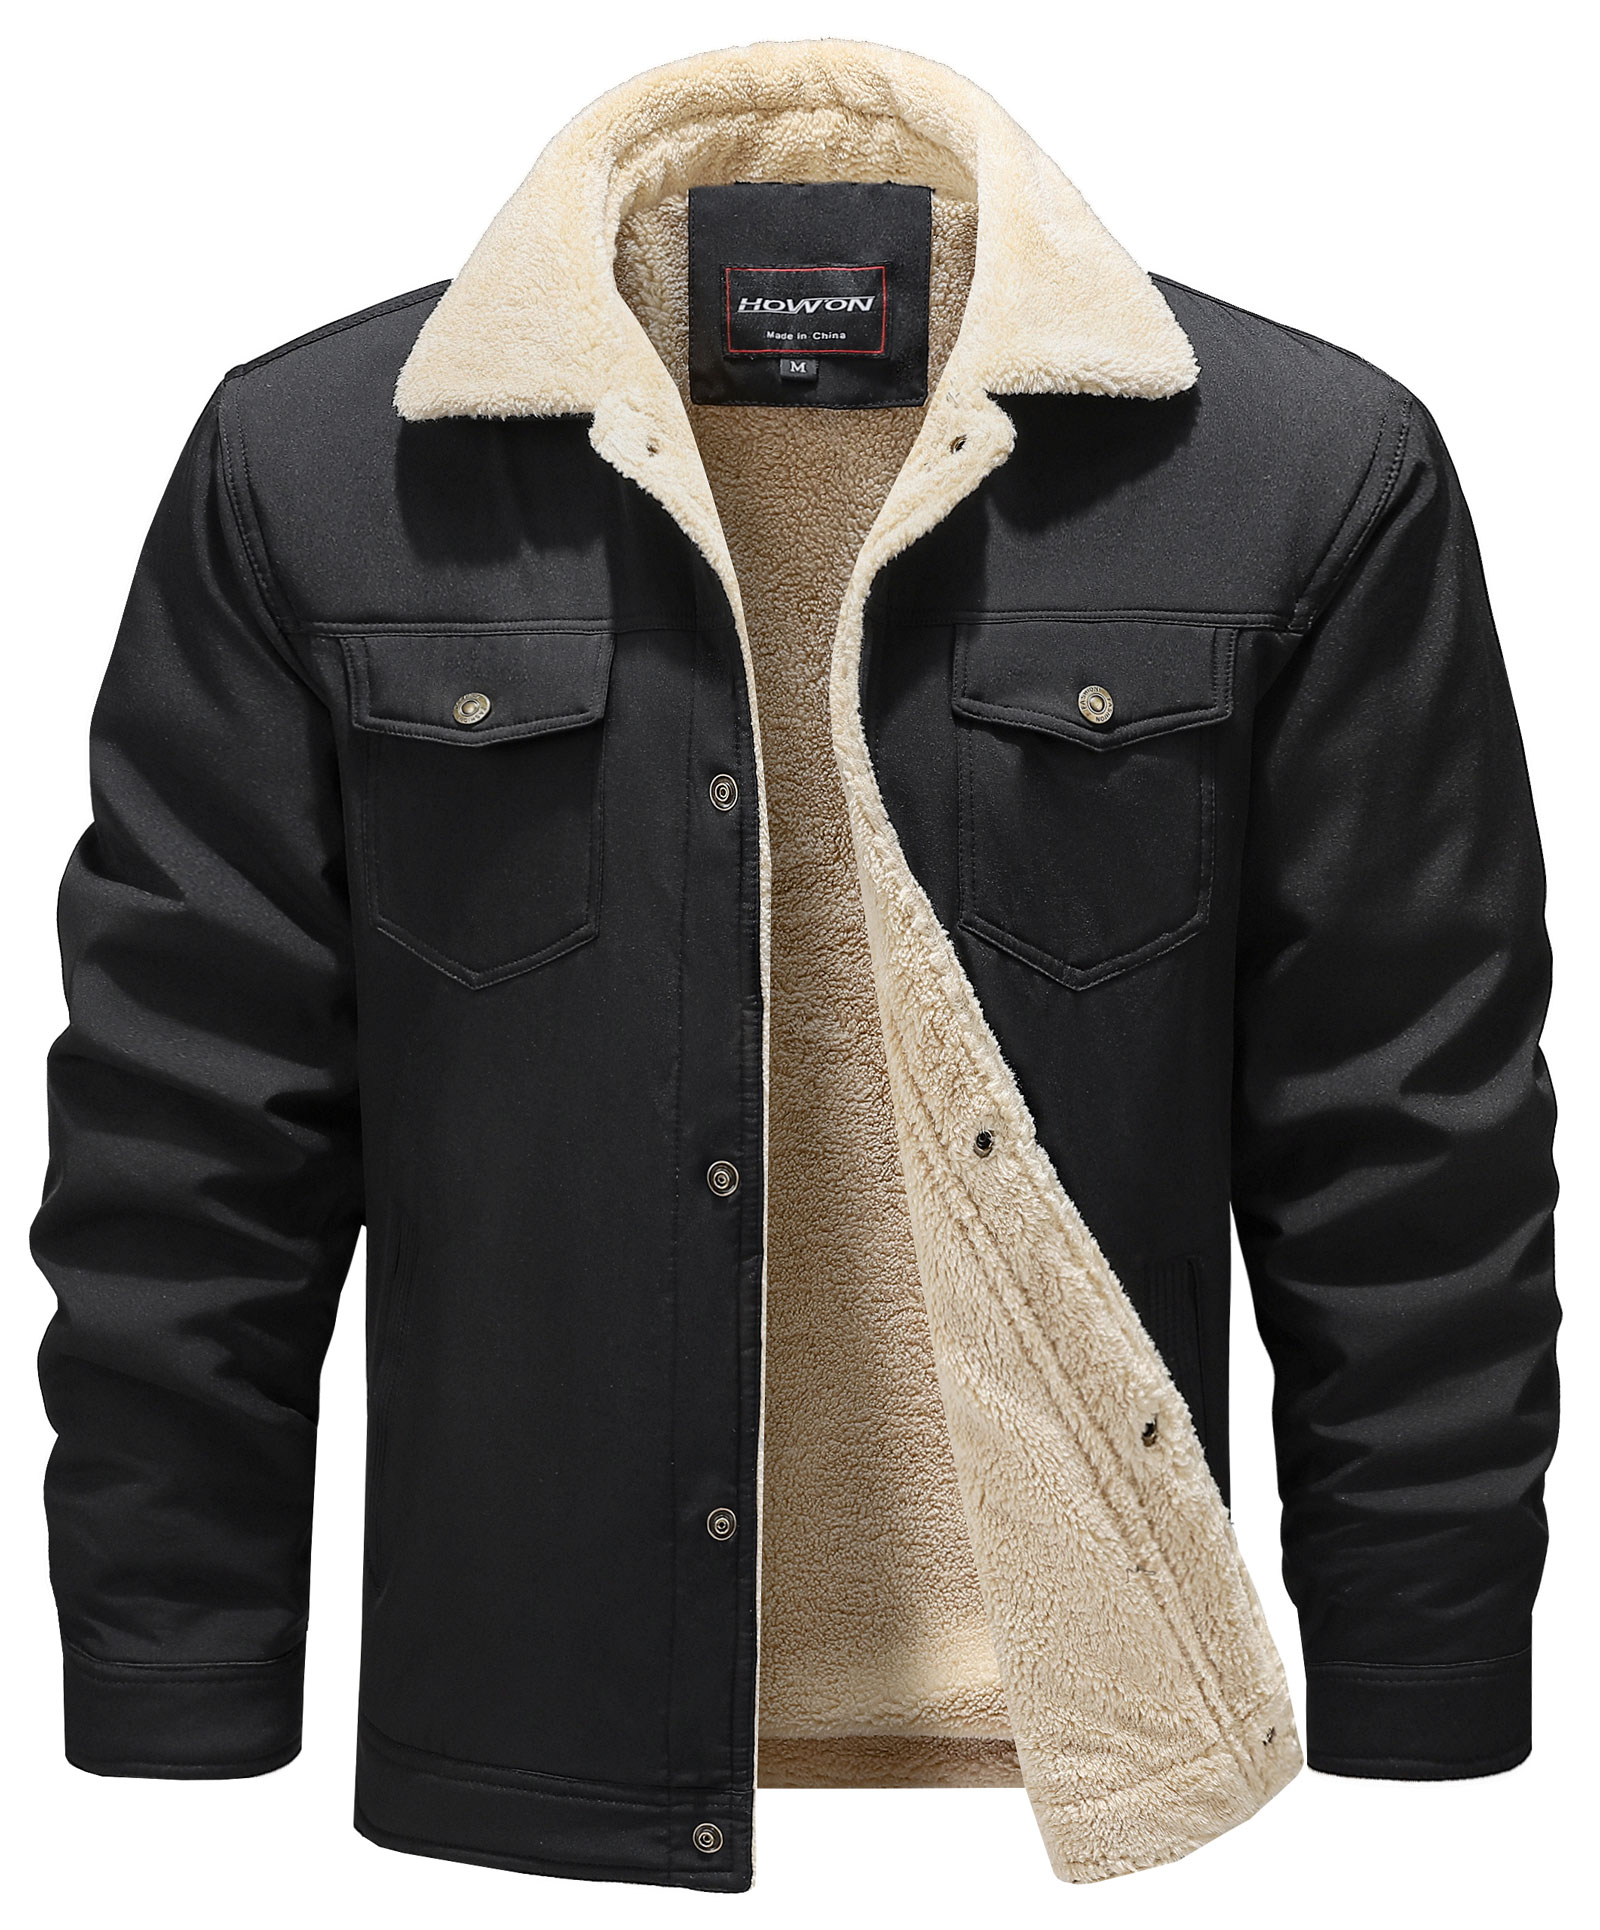 Wells Lamont Quilted Flex Canvas Thermal Sherpa Lined Shirt Jacket ...